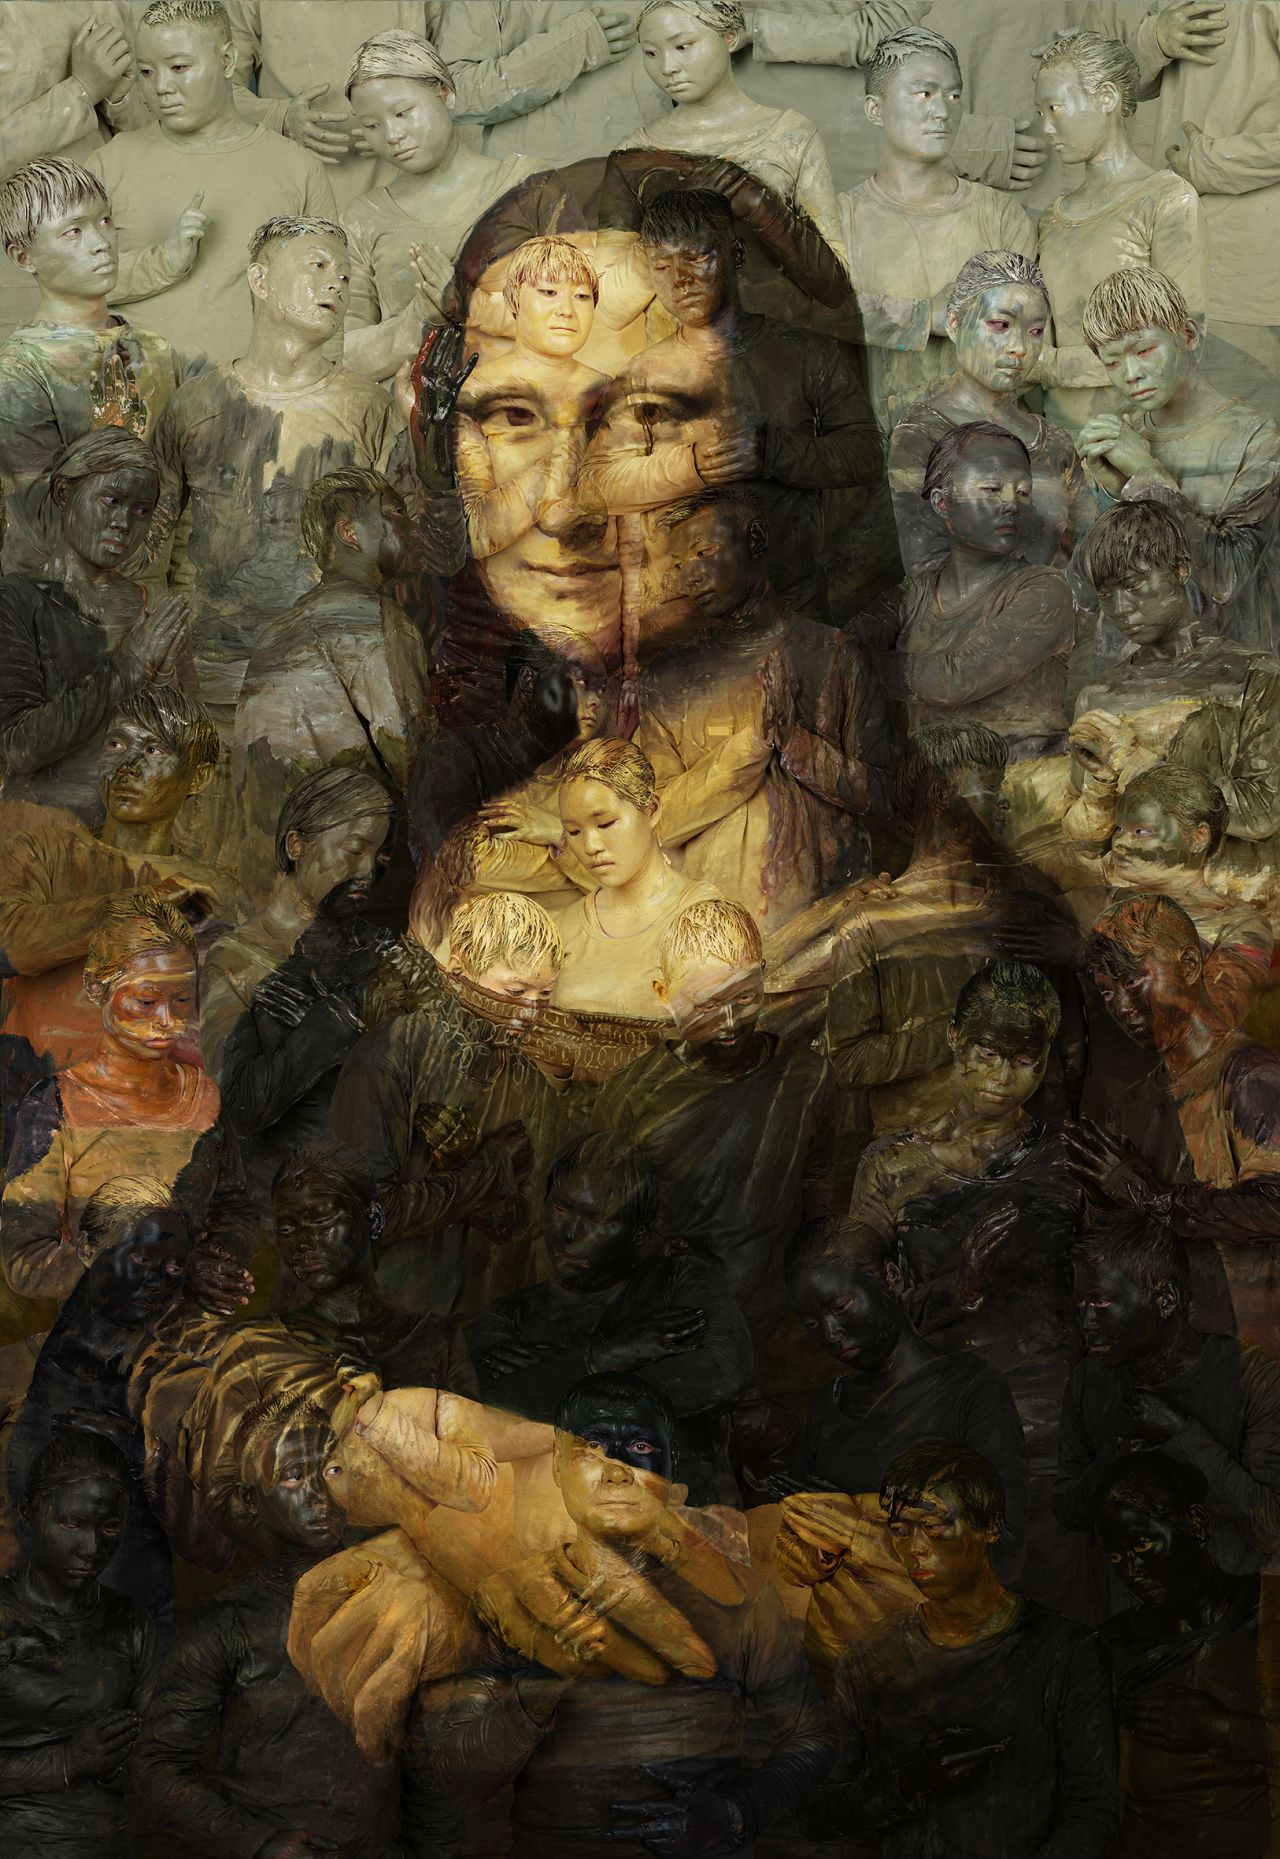 in 2016, Liu recreated Da Vinci's Mona Lisa, and hired a hacker to replace images of them in search results on numerous websites on Google and Baidu. 